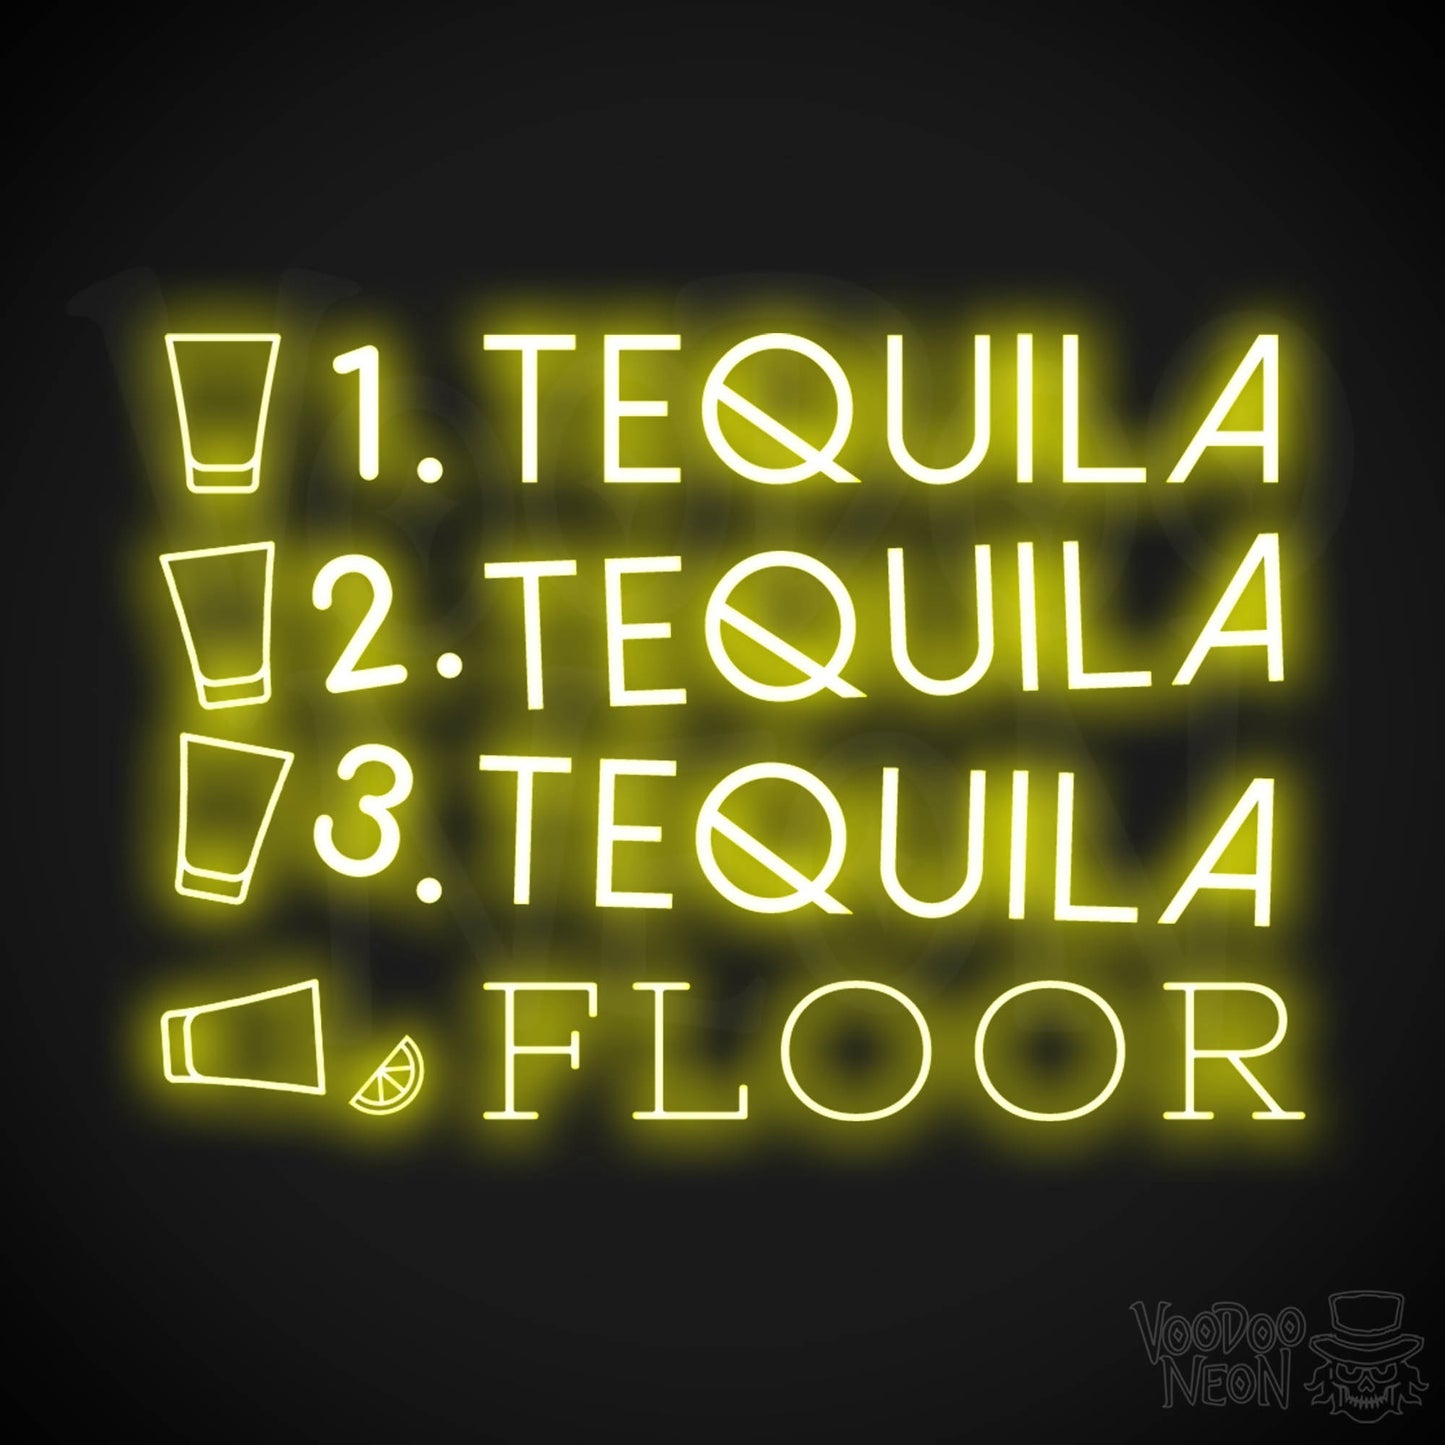 One Tequila Two Tequila Three Tequila Floor Neon sign - Neon Wall Art - Color Yellow